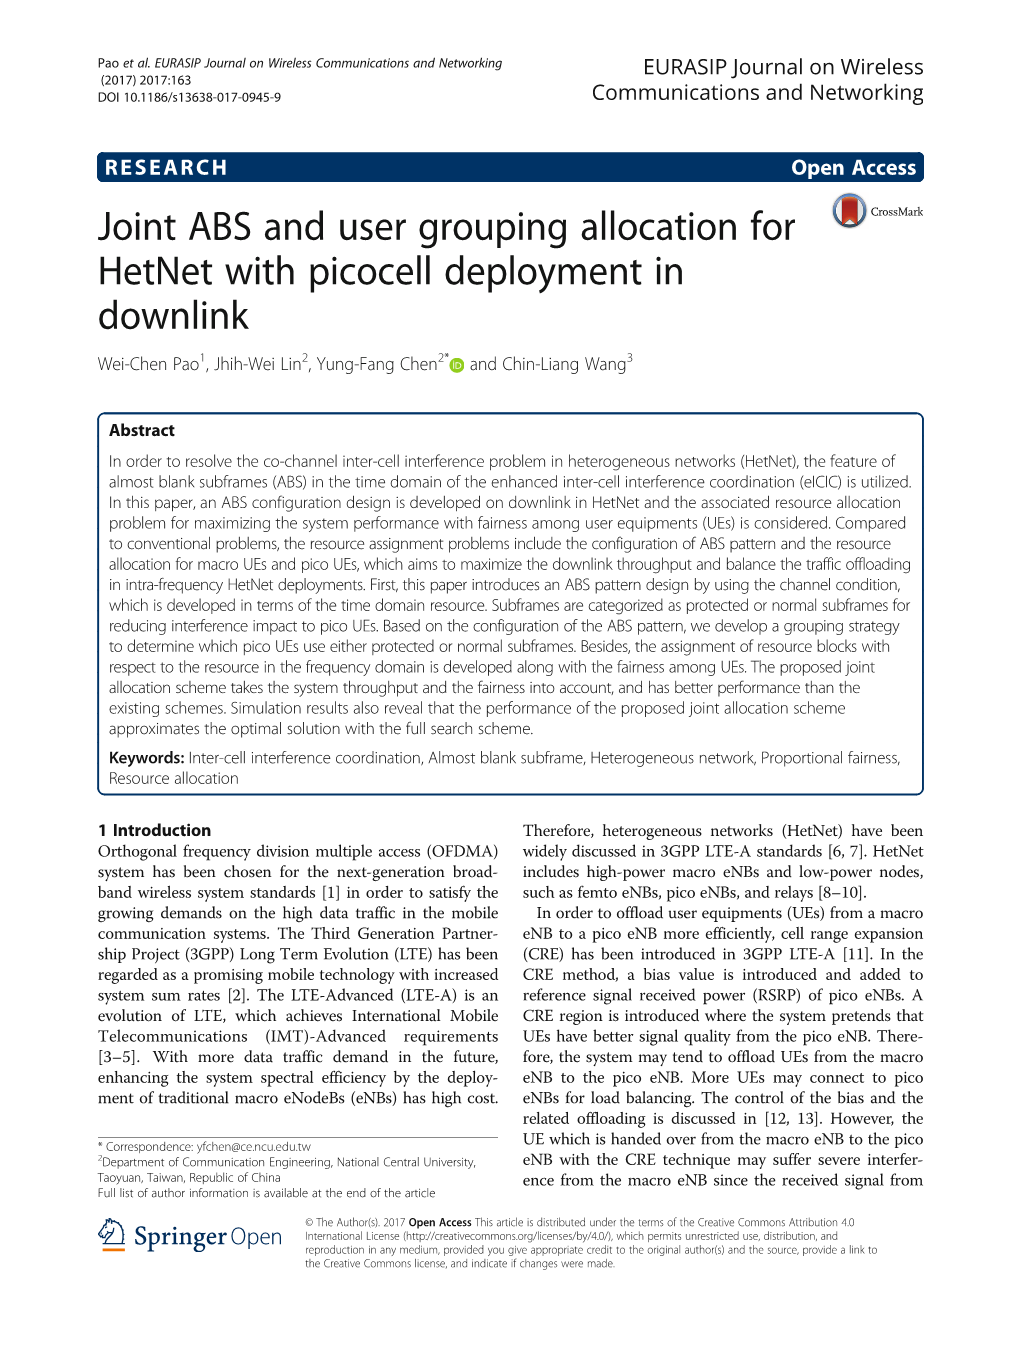 Joint ABS and User Grouping Allocation for Hetnet with Picocell Deployment in Downlink Wei-Chen Pao1, Jhih-Wei Lin2, Yung-Fang Chen2* and Chin-Liang Wang3